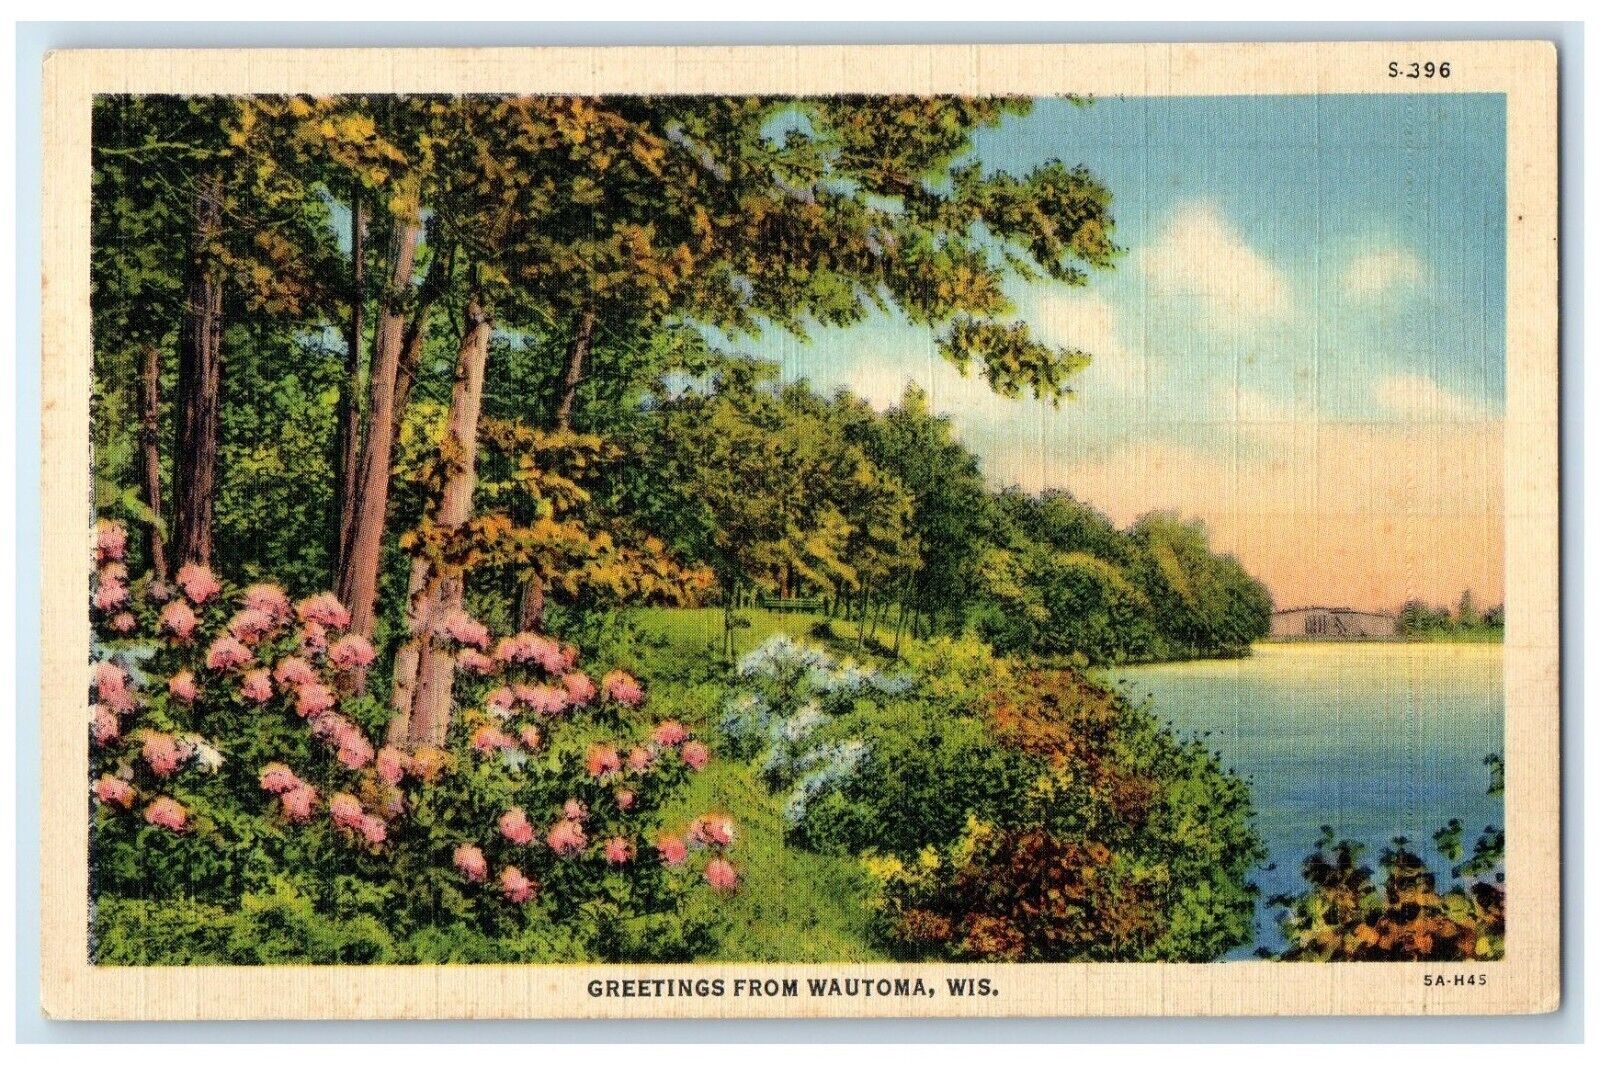 c1940 Greetings From Trees River Lake Flower Wautoma Wisconsin Vintage Postcard